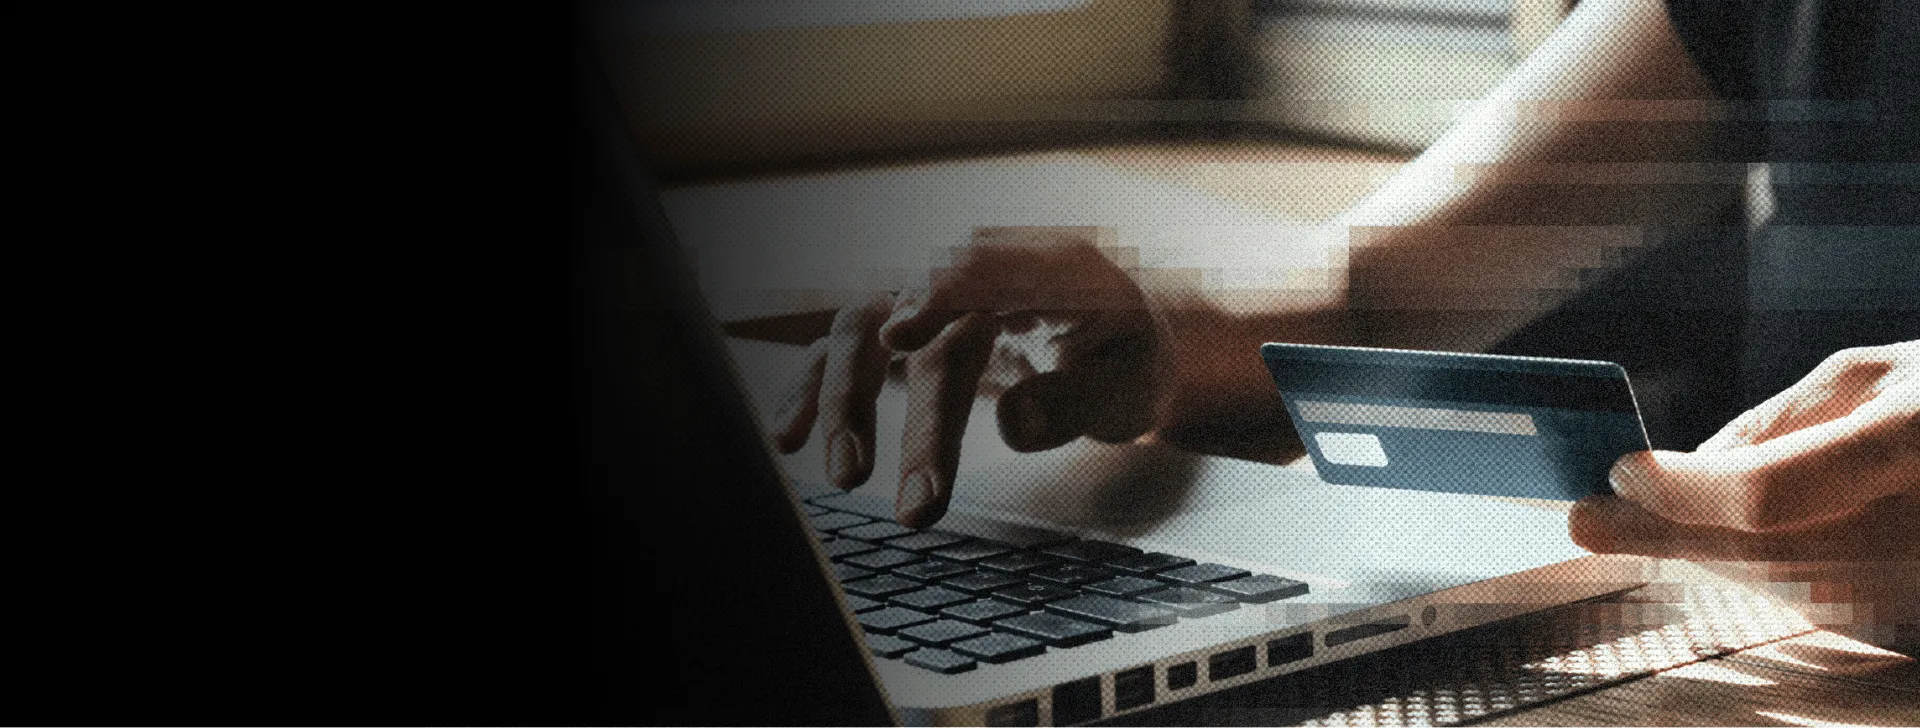 Anticipate and mitigate the effects of payment fraud